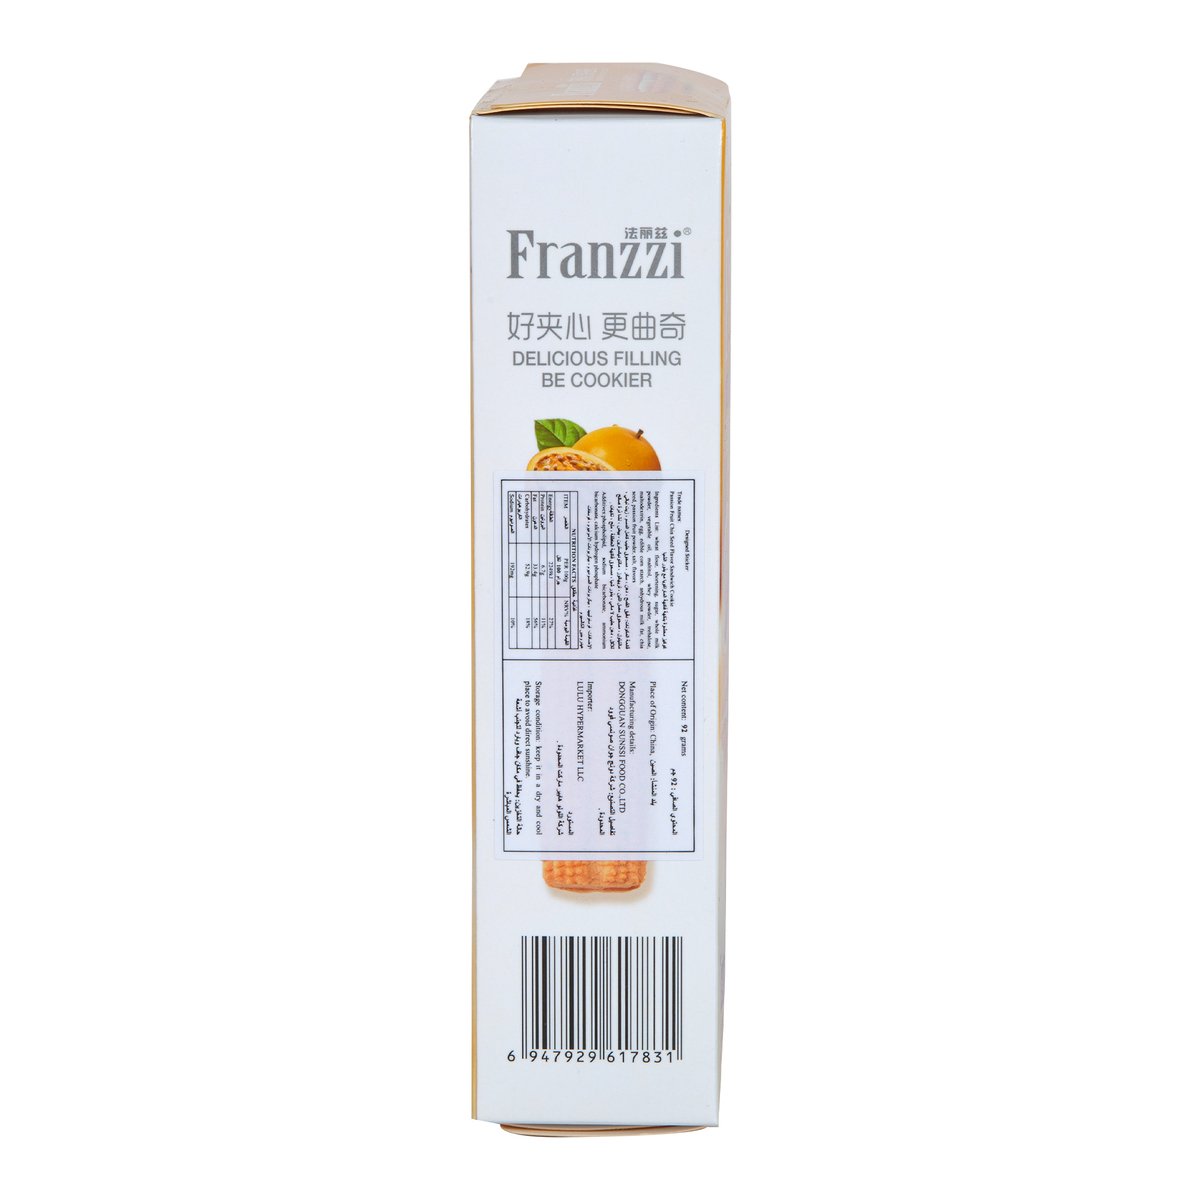 Franzzi Passion Fruit Chia Seed Flavor Sandwich Cookie 92 g